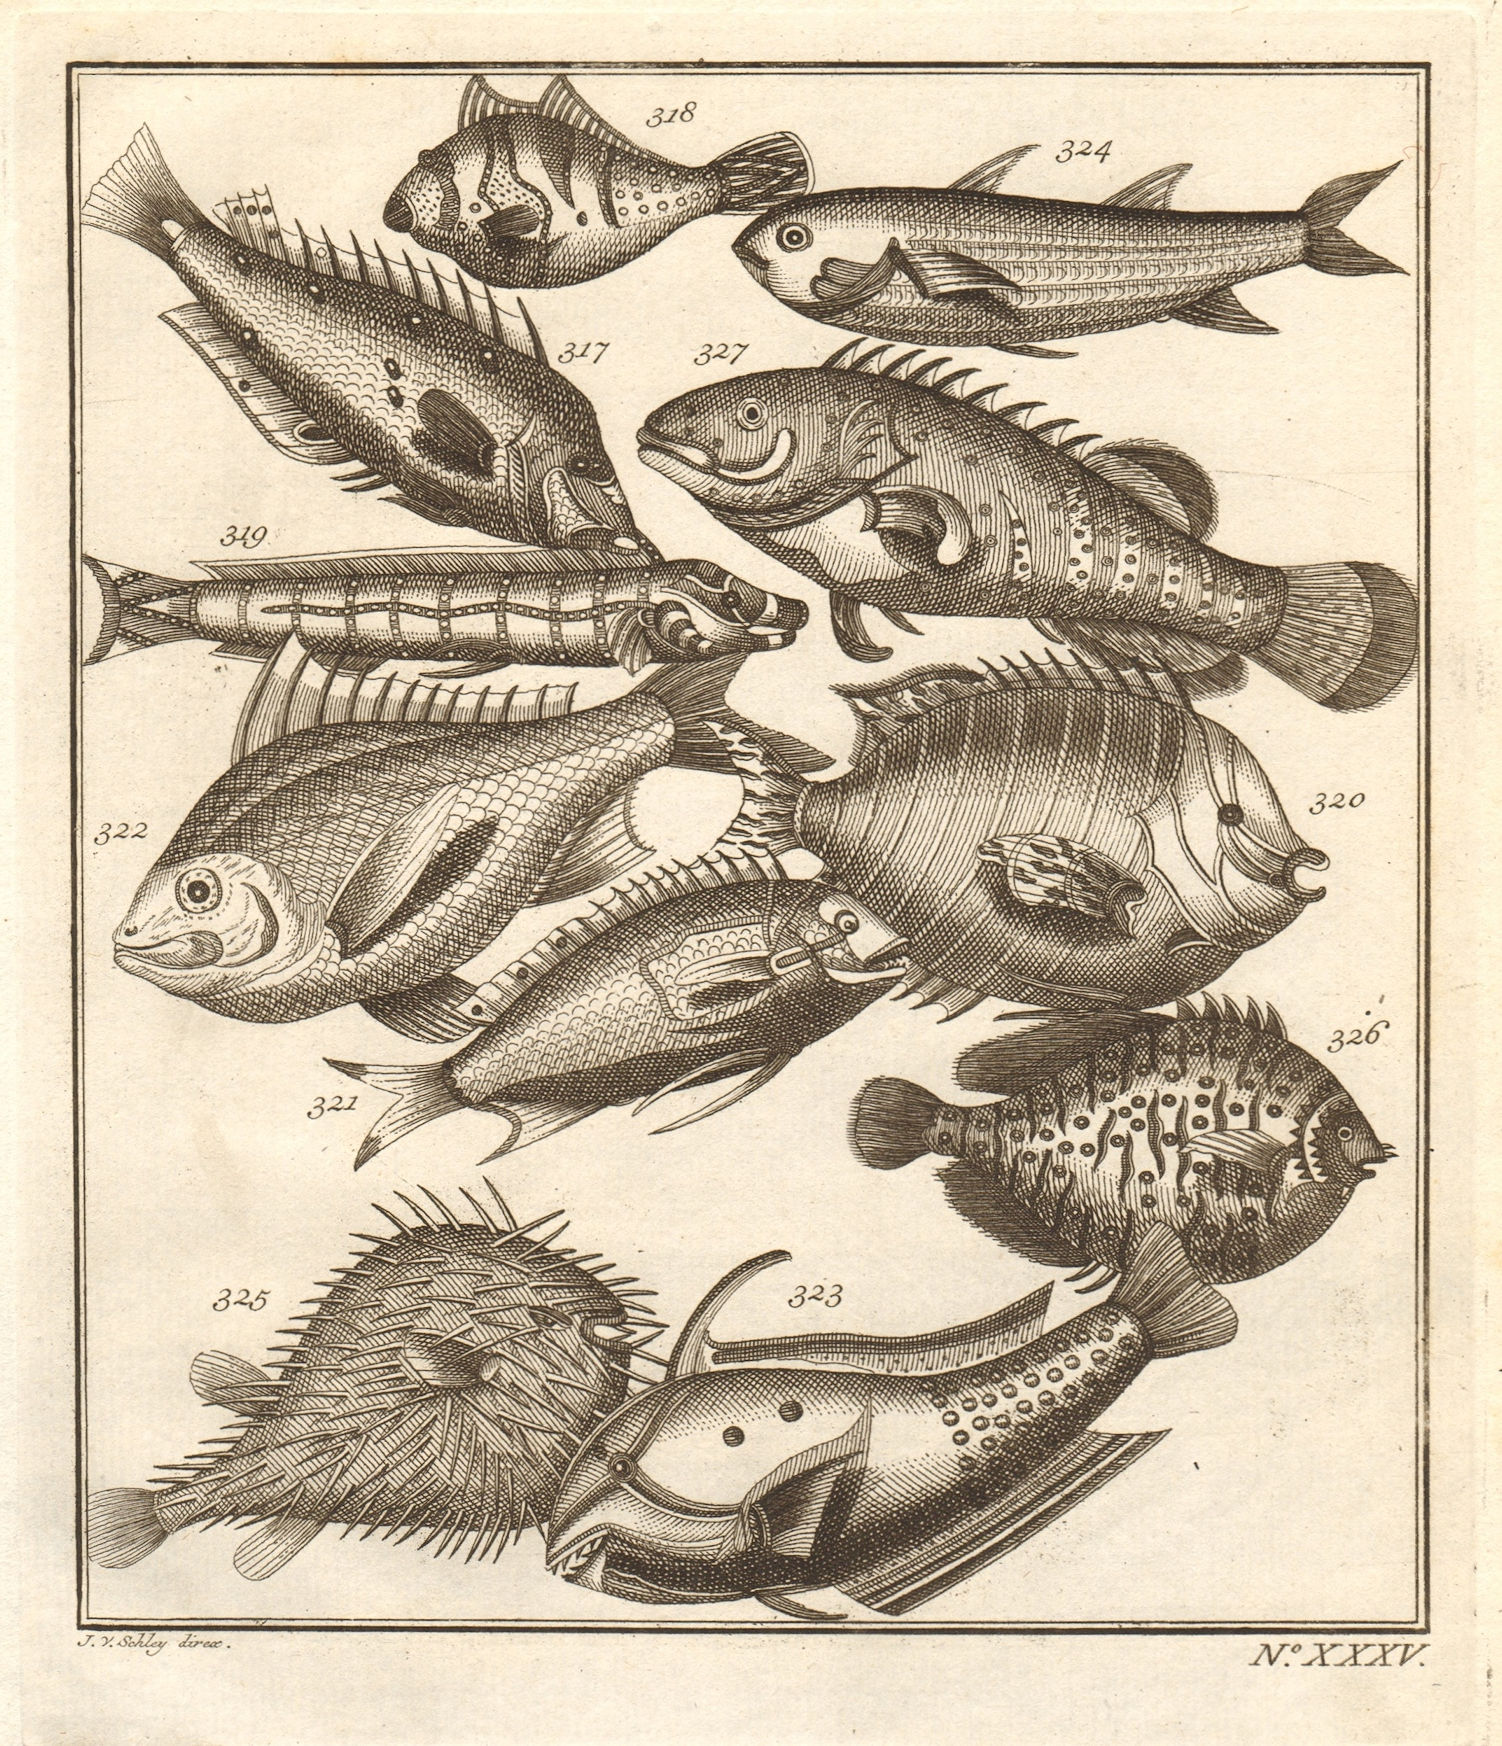 Associate Product XXXV. Poissons d'Ambione. Indonesia Moluccas Maluku tropical fish. SCHLEY 1763